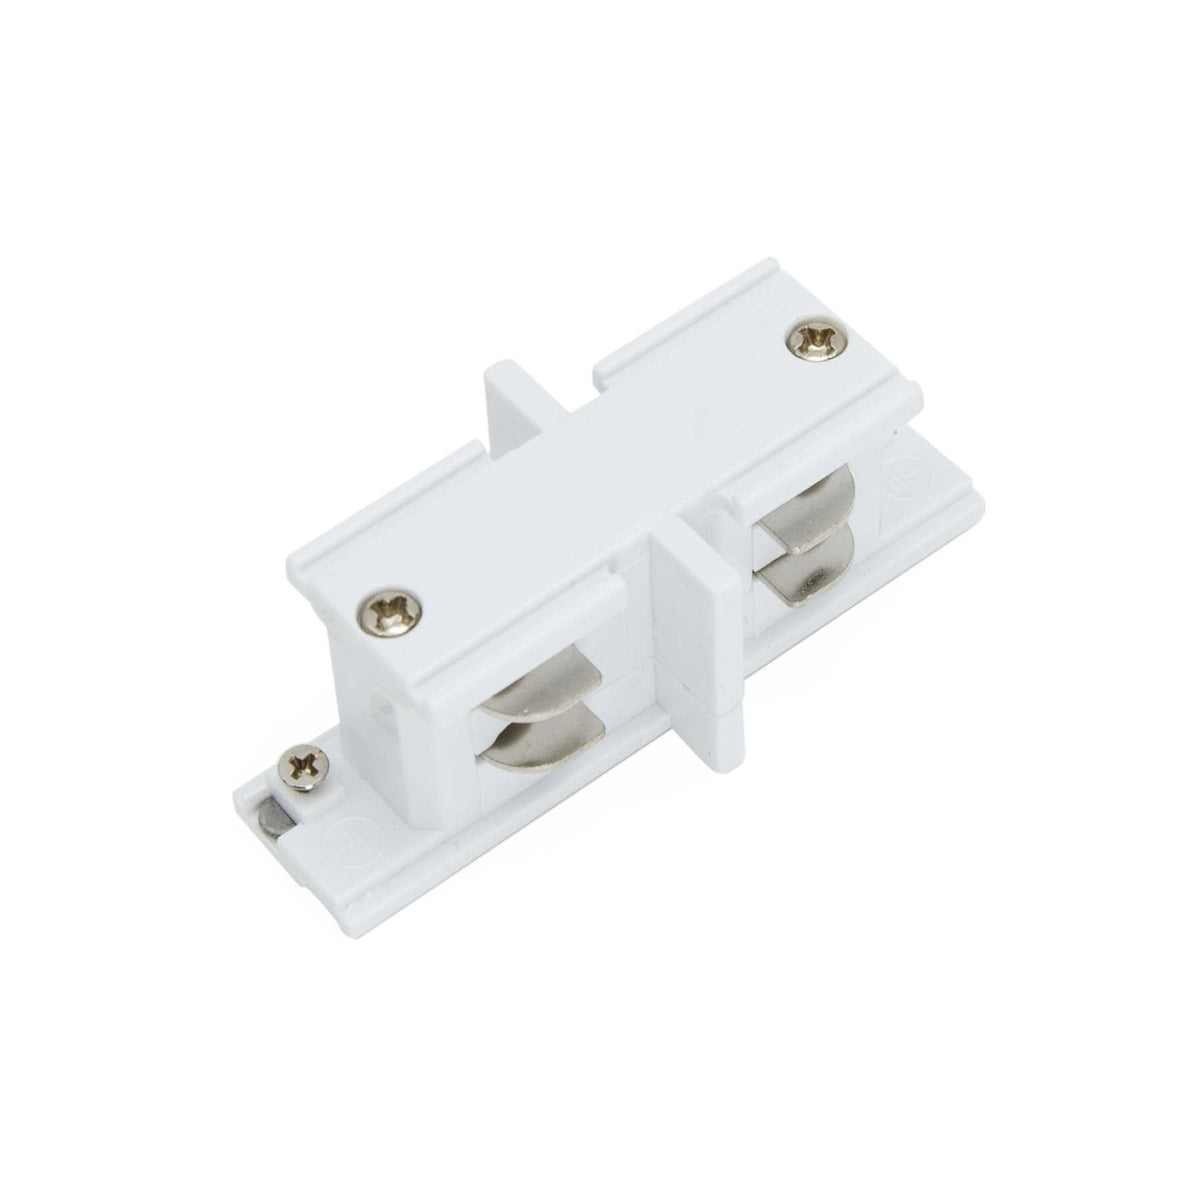 G.W.S LED Wholesale Ltd. 3 Circuits / White Straight Connector For LED Track Light